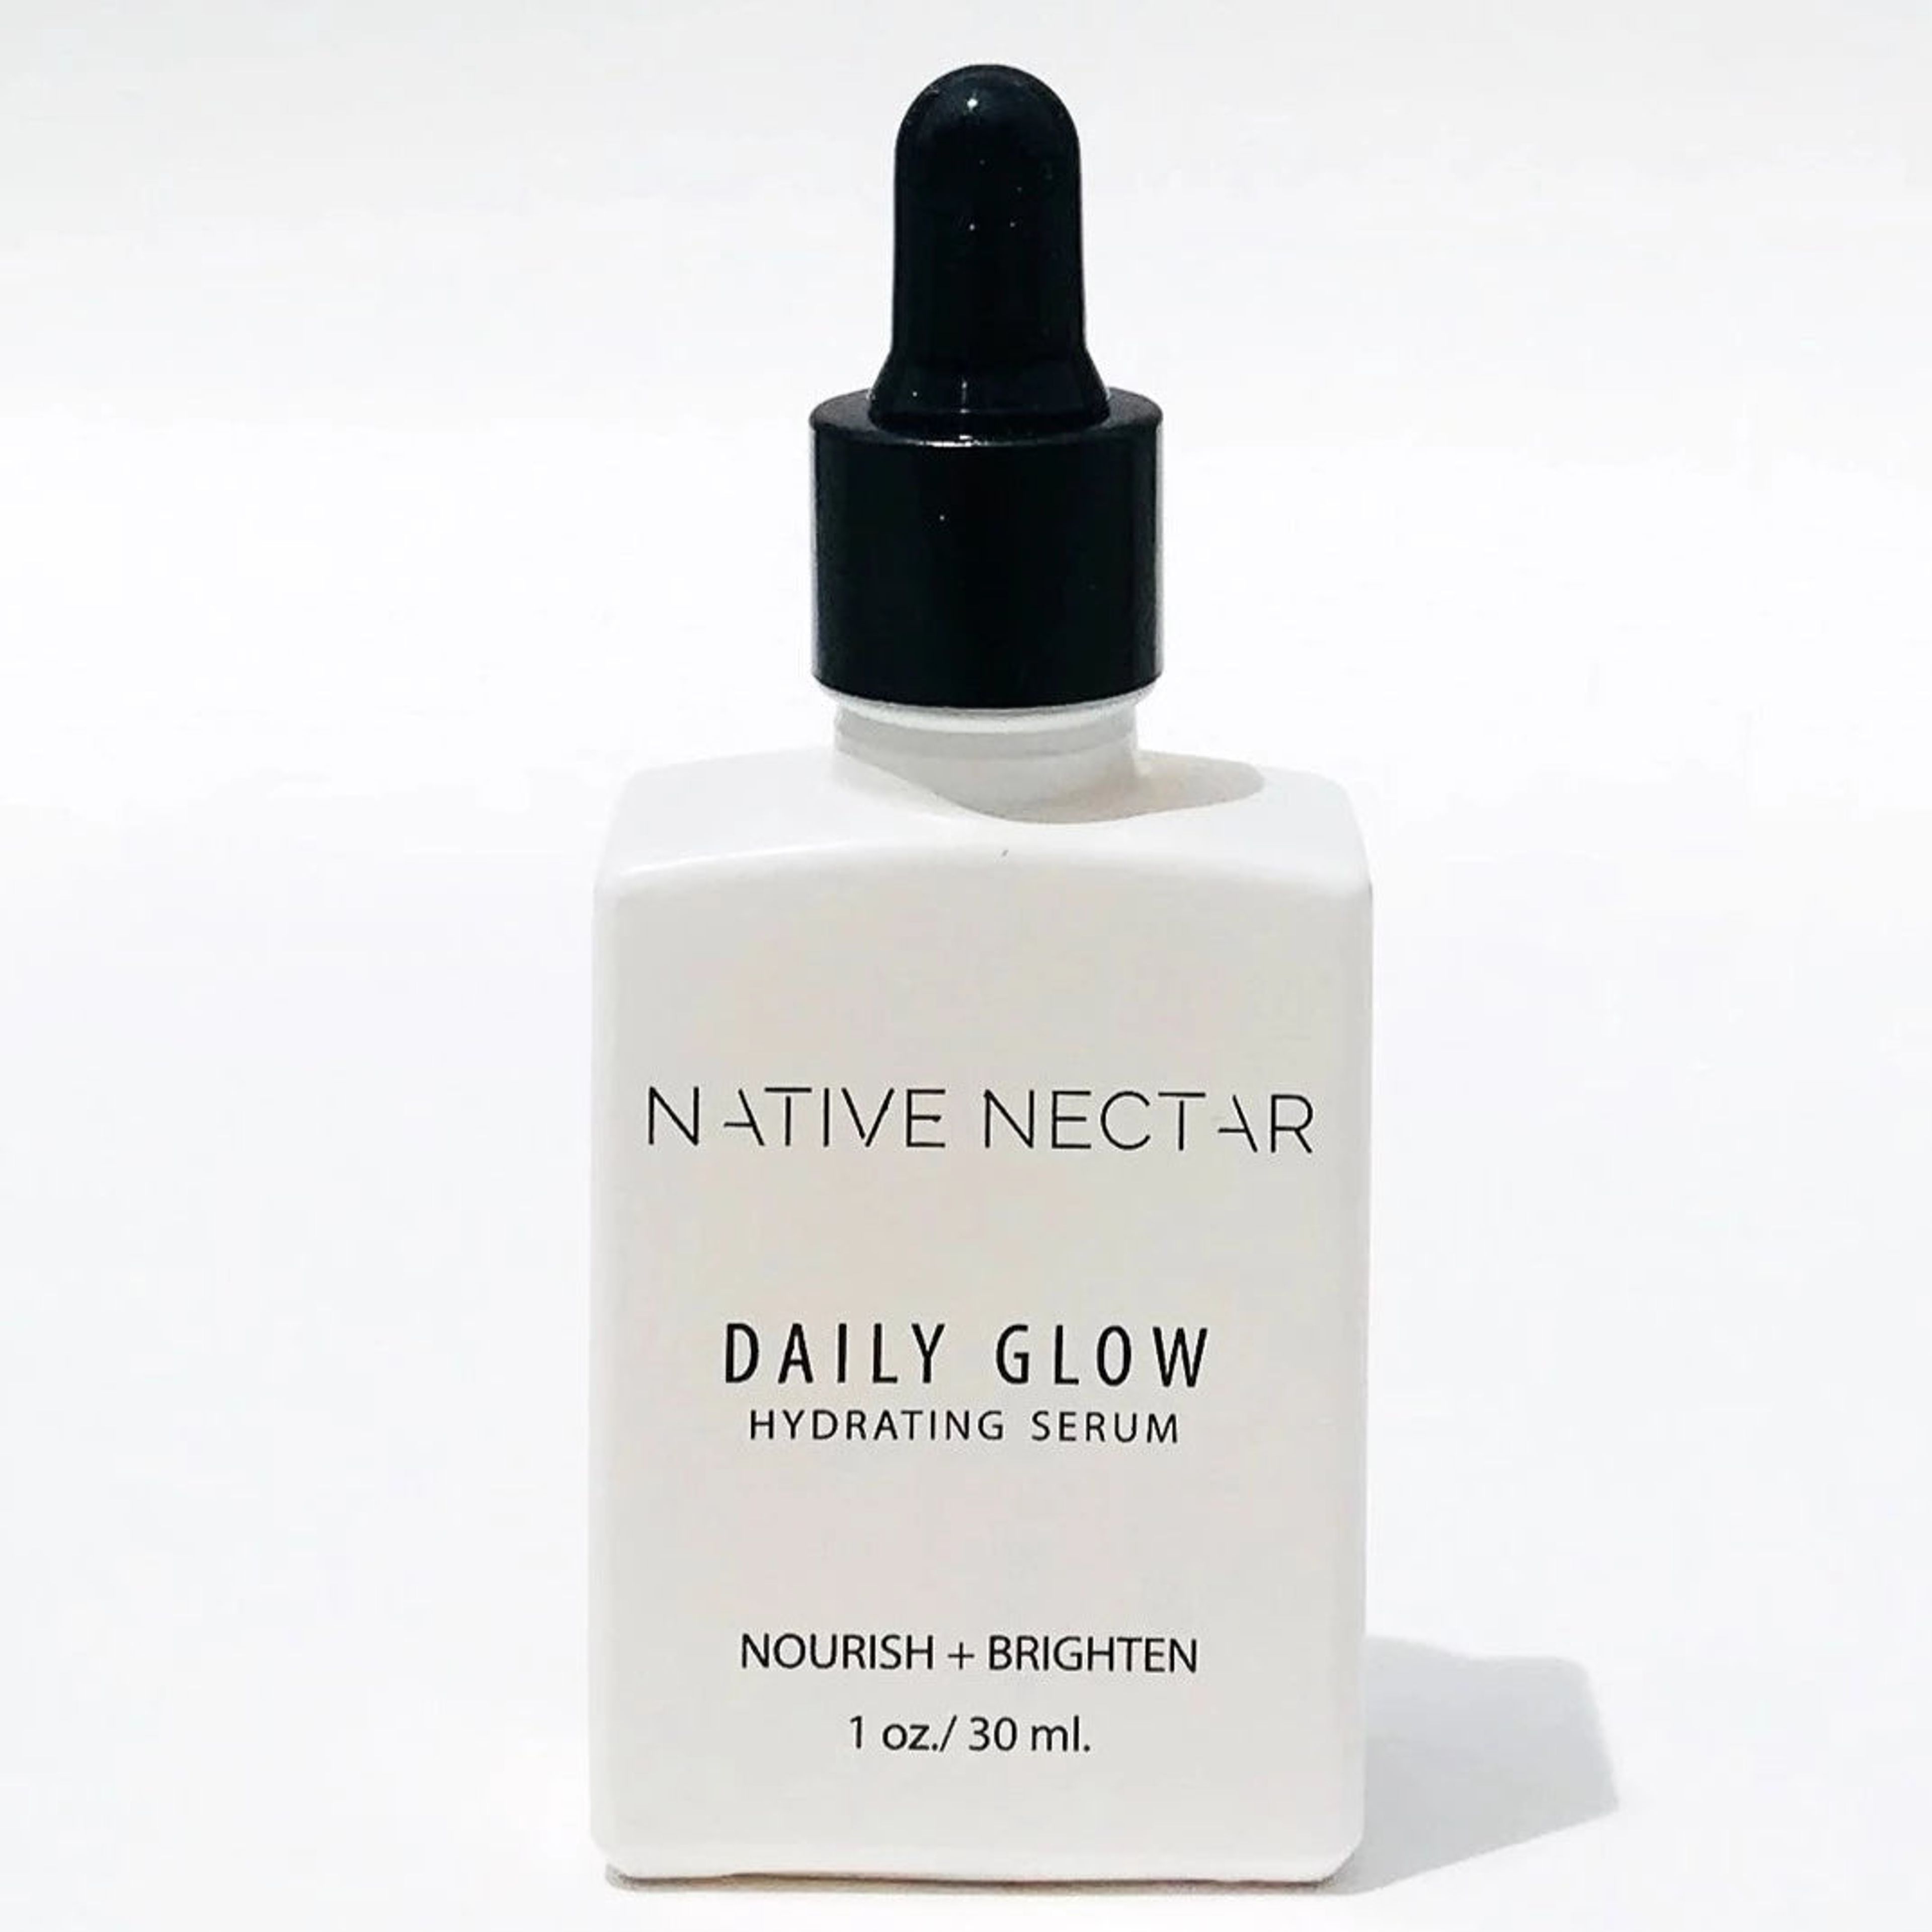 Daily Glow Face Oil